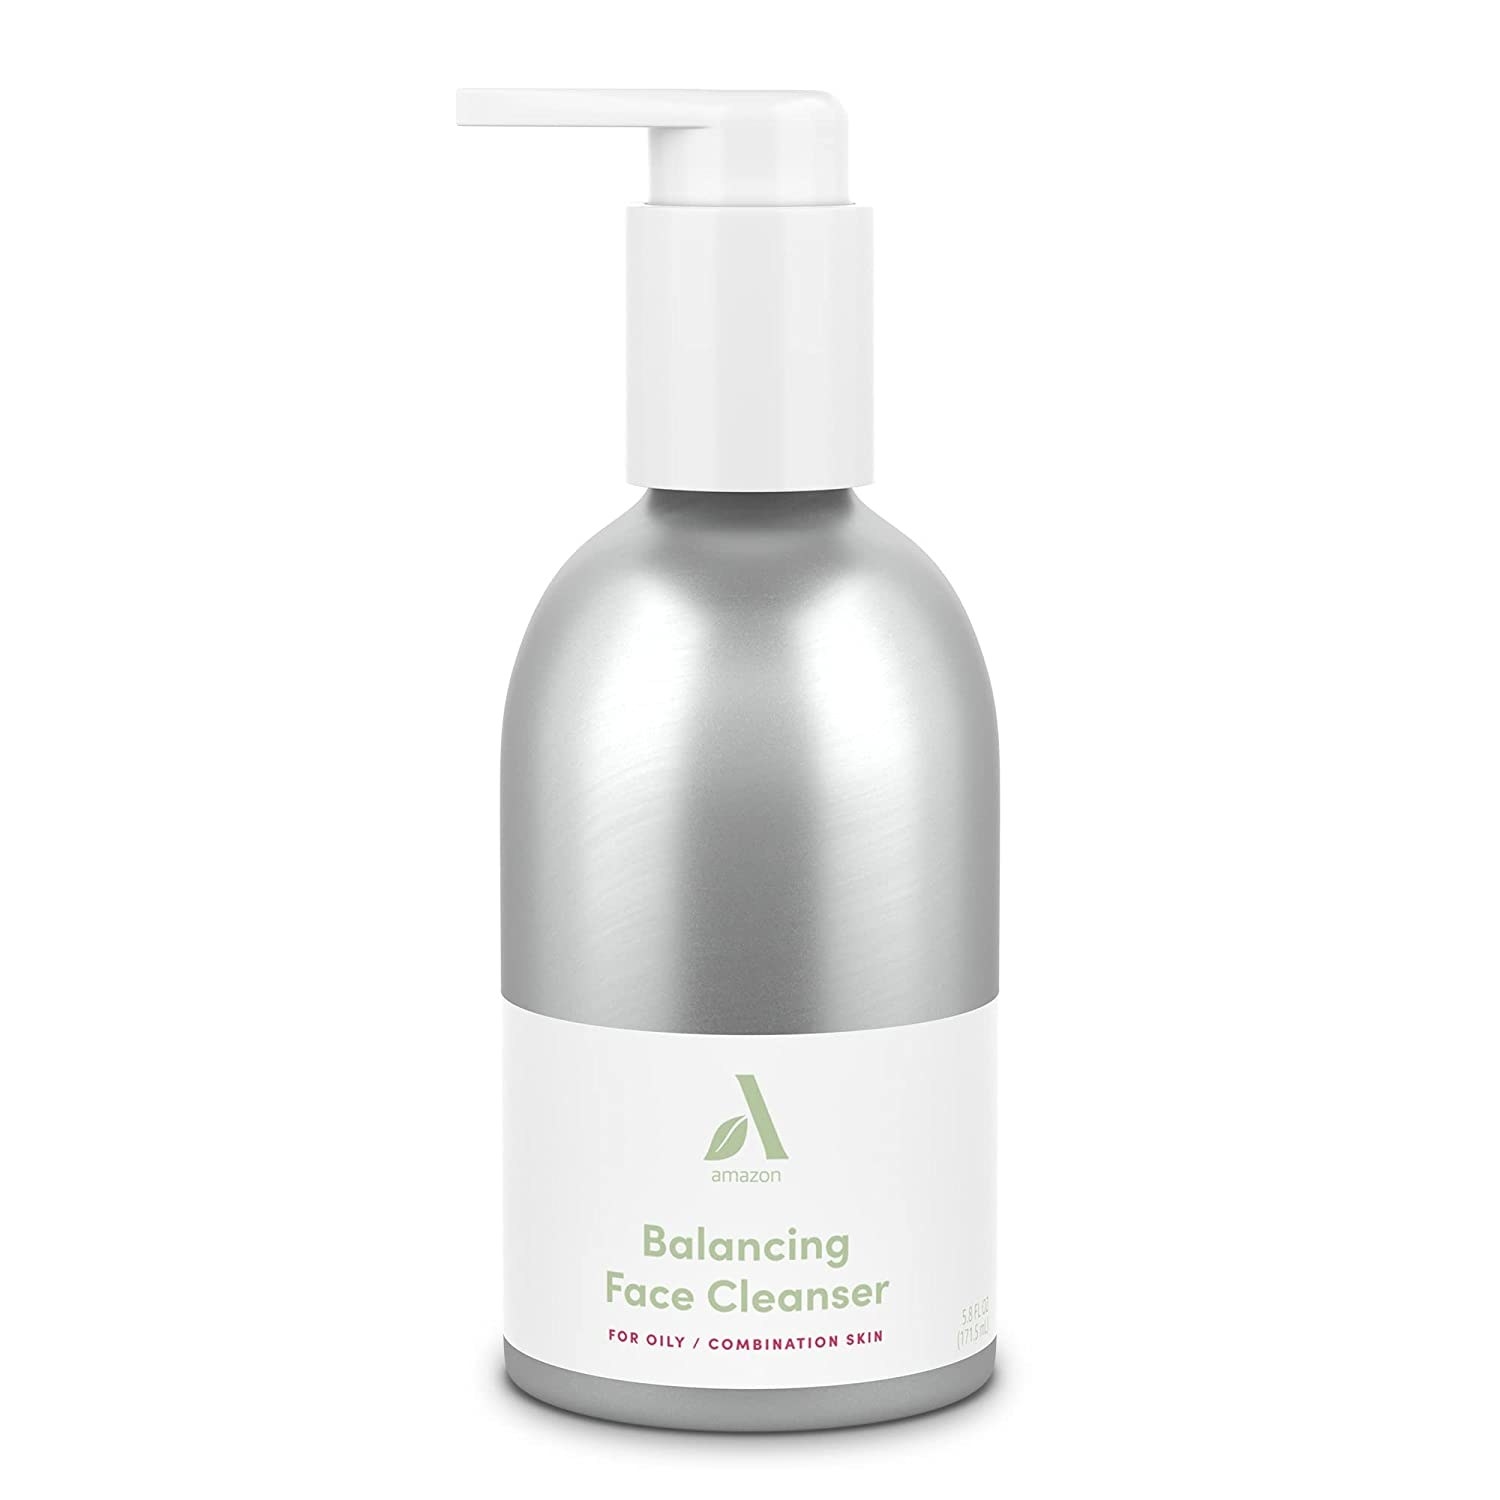 a bottle of the balancing face cleanser